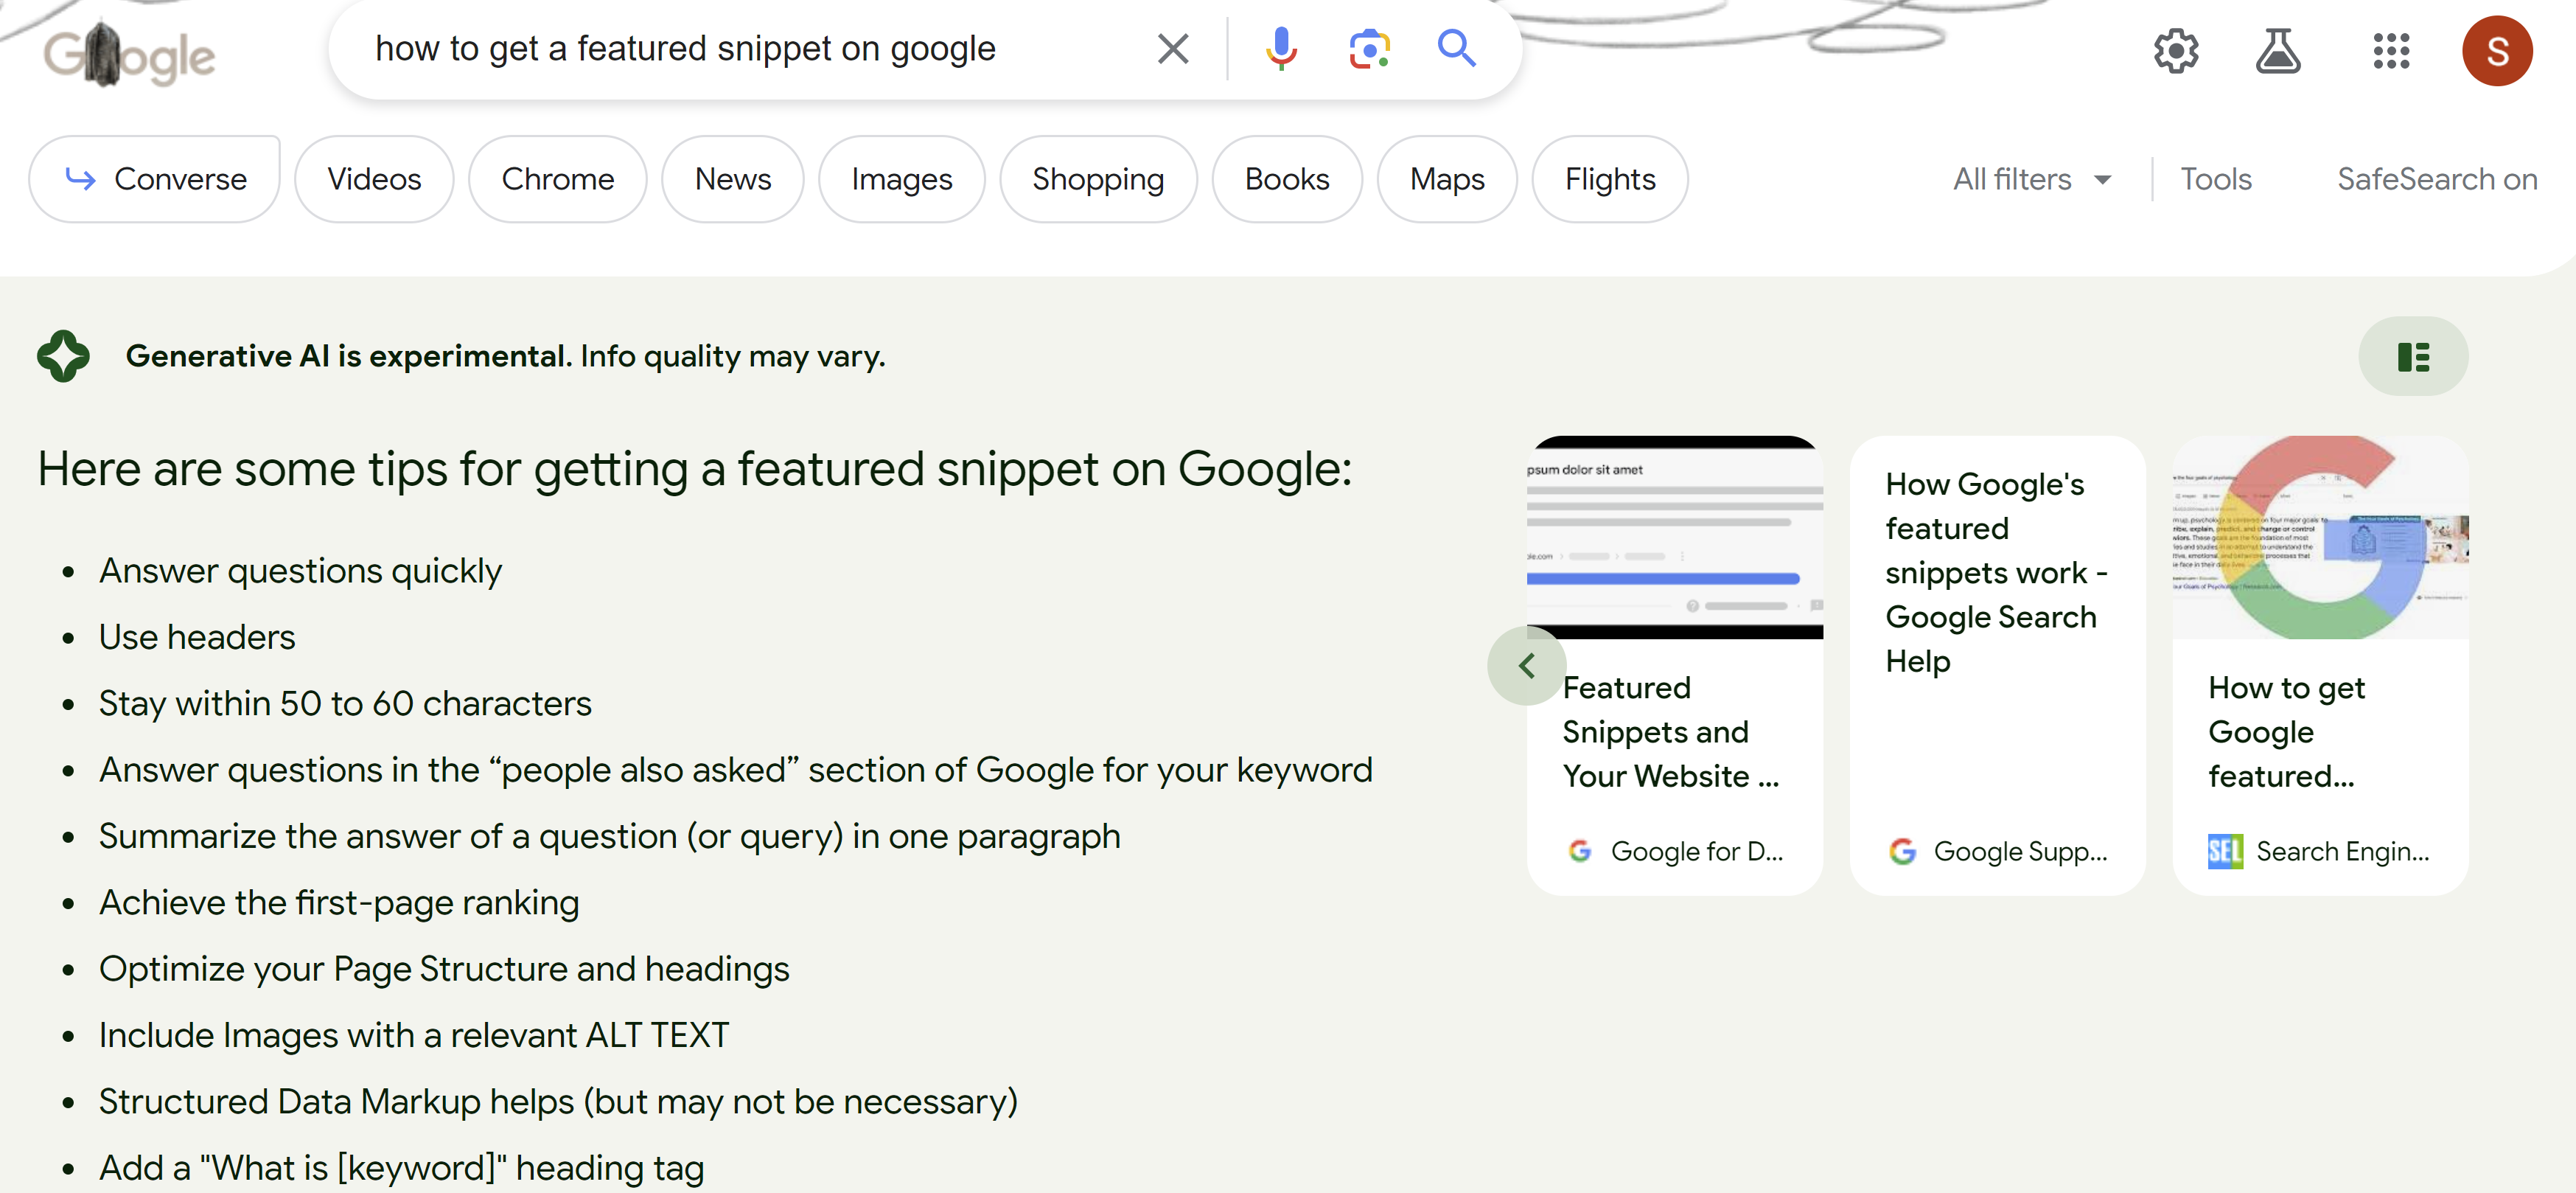 Google SGE AI-Snapshot: How to get a Featured Snippet